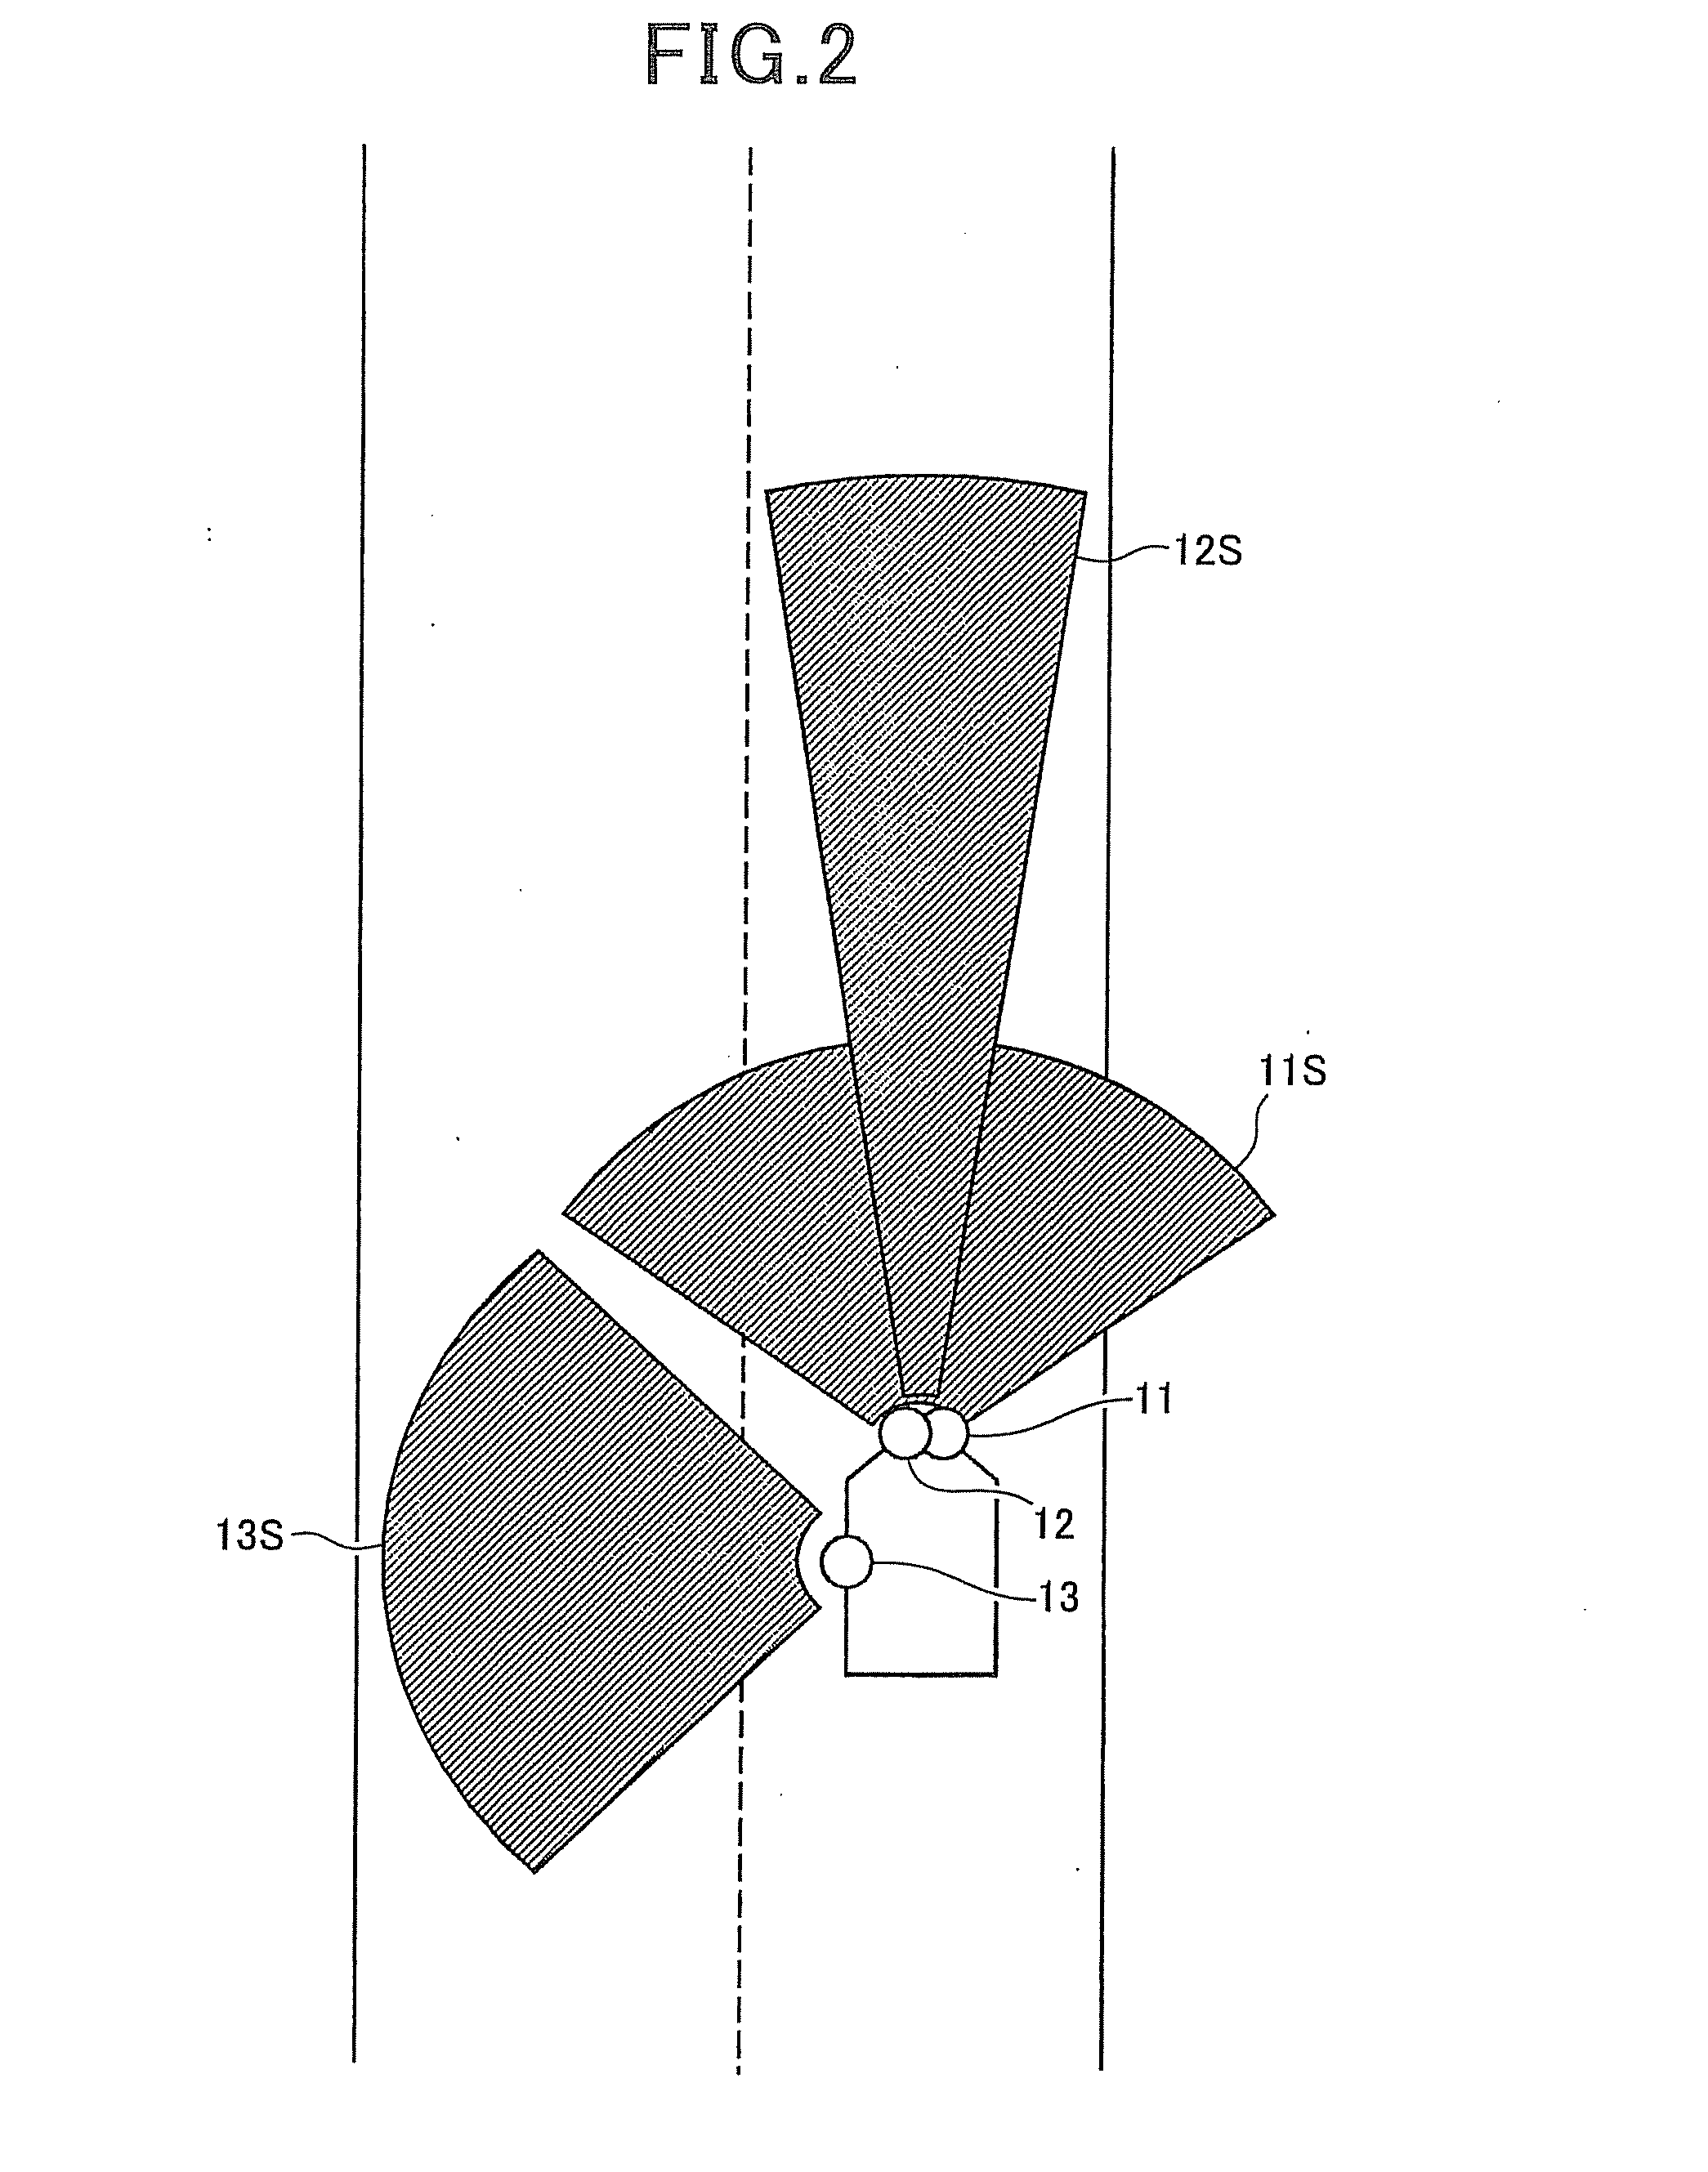 Driving control apparatus mounted on vehicle to avoid collision with preceding vehicle